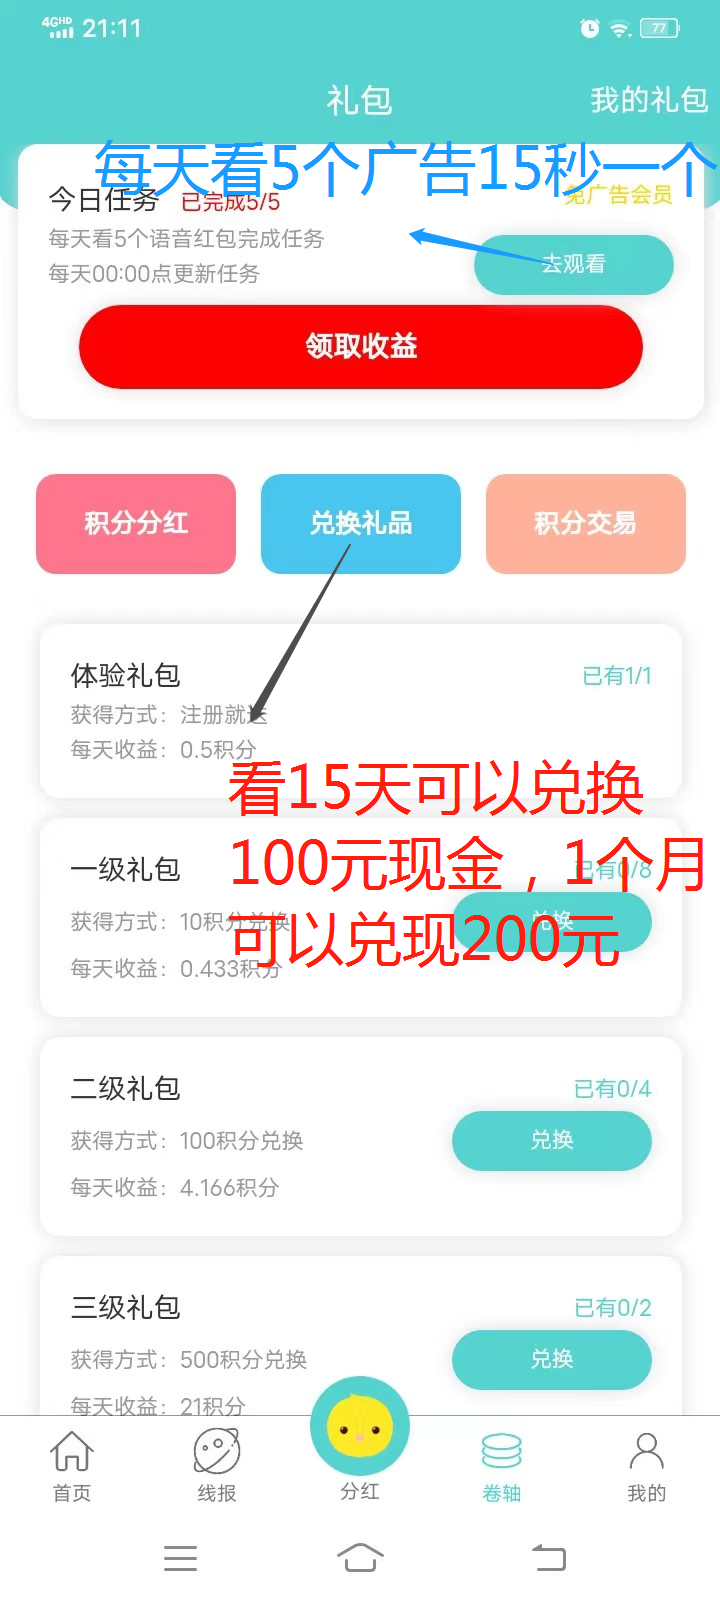 V信图片_20220503211915.png